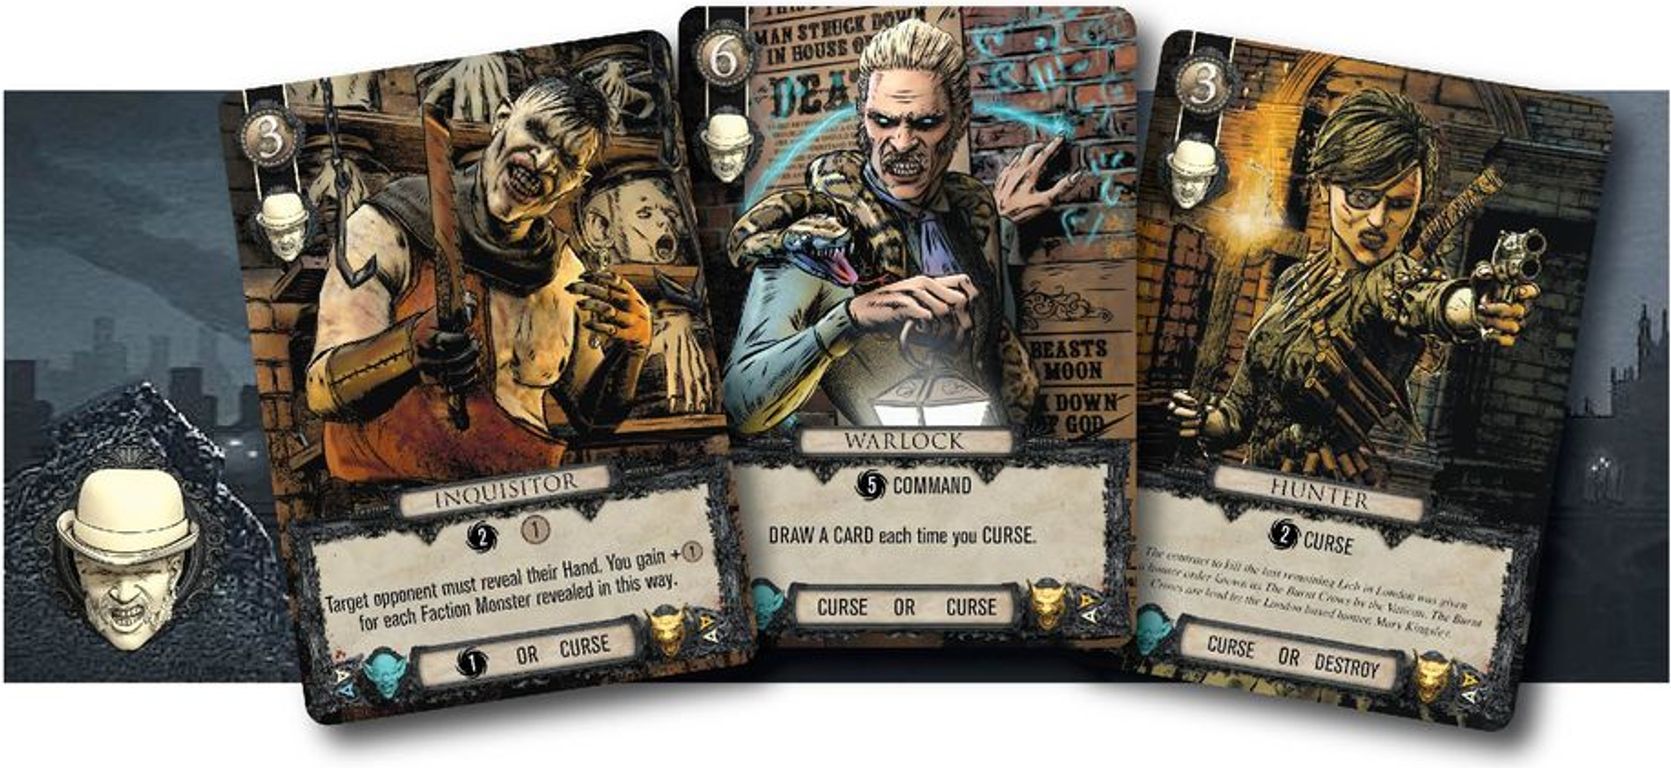 Terrors of London cards